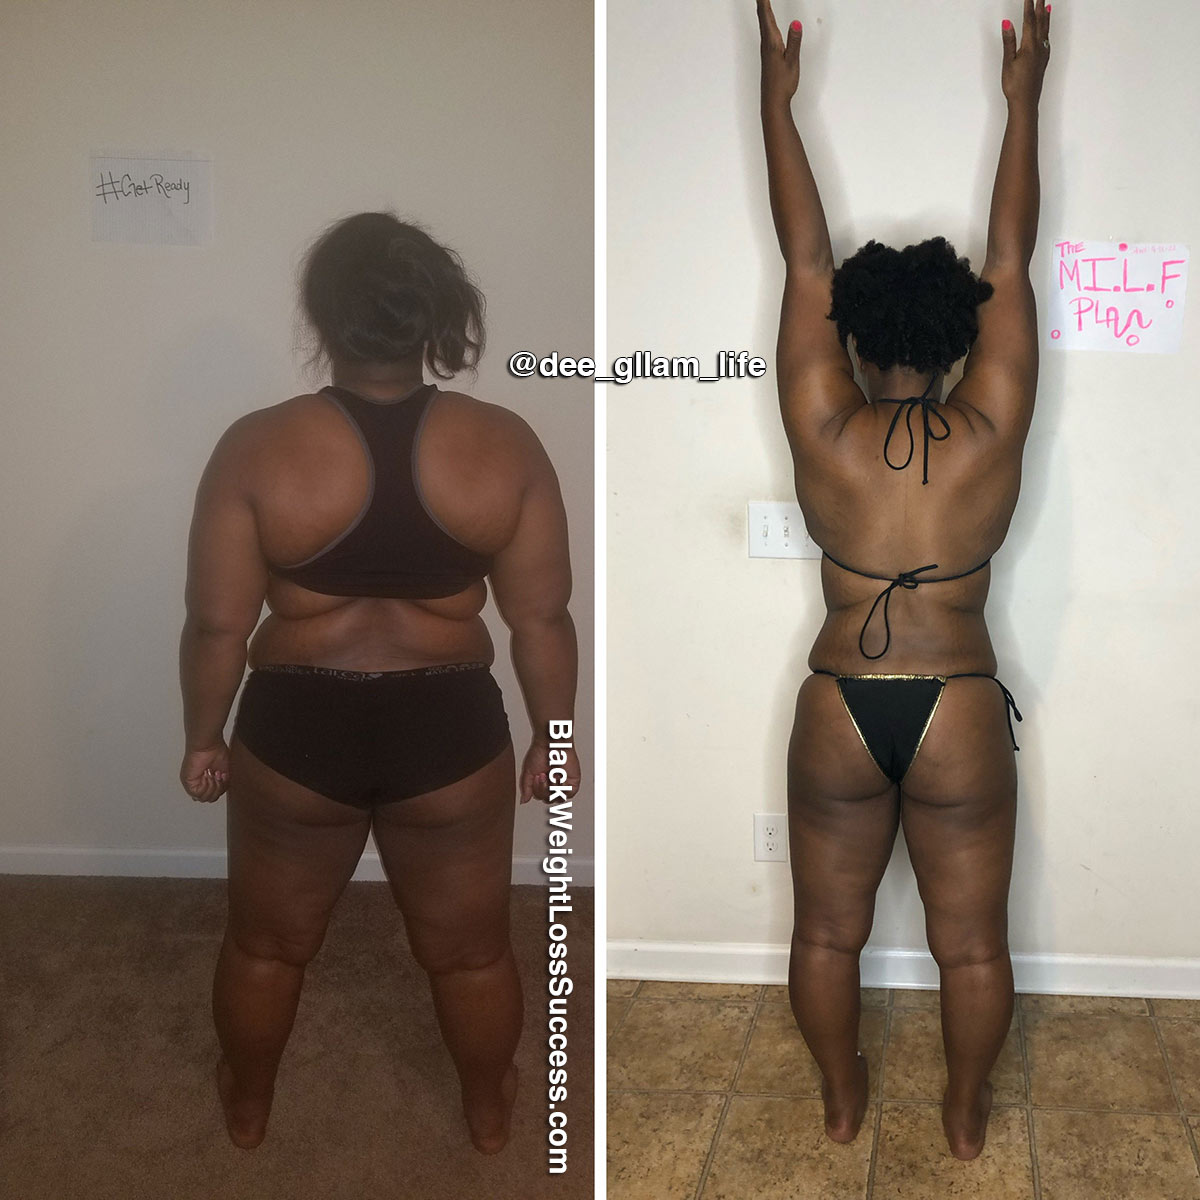 Dee before and after weight loss